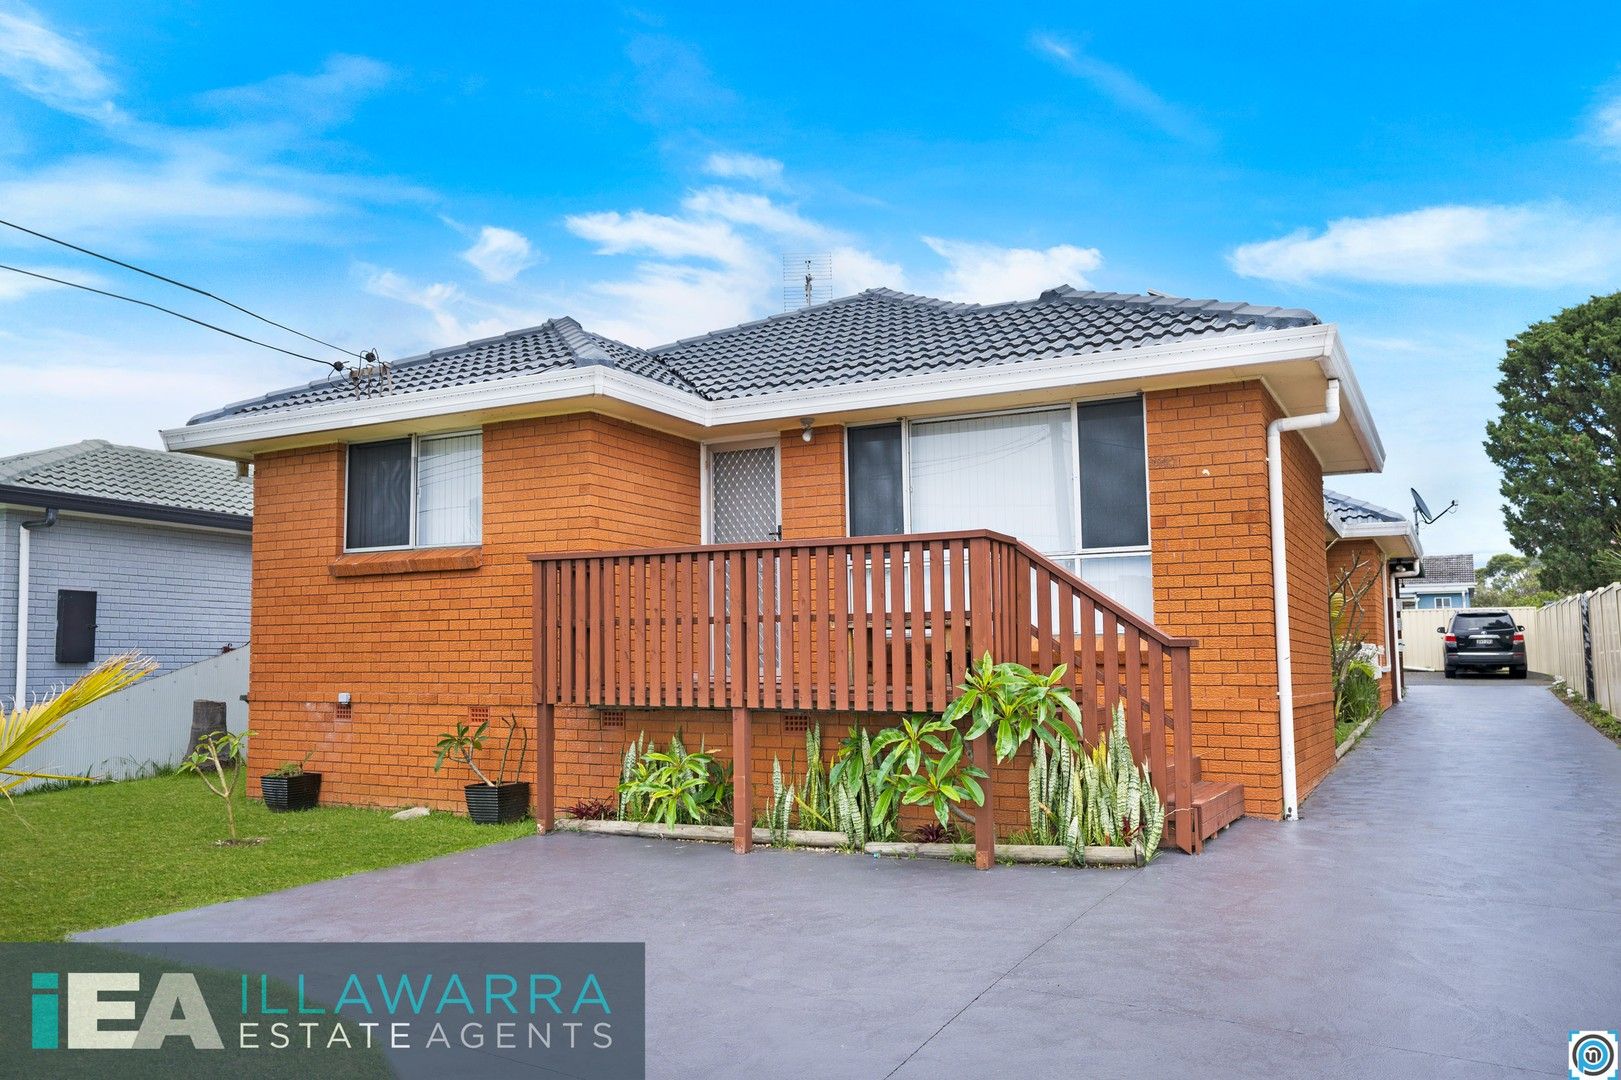 2 bedrooms House in 1/320 Shellharbour Road BARRACK HEIGHTS NSW, 2528